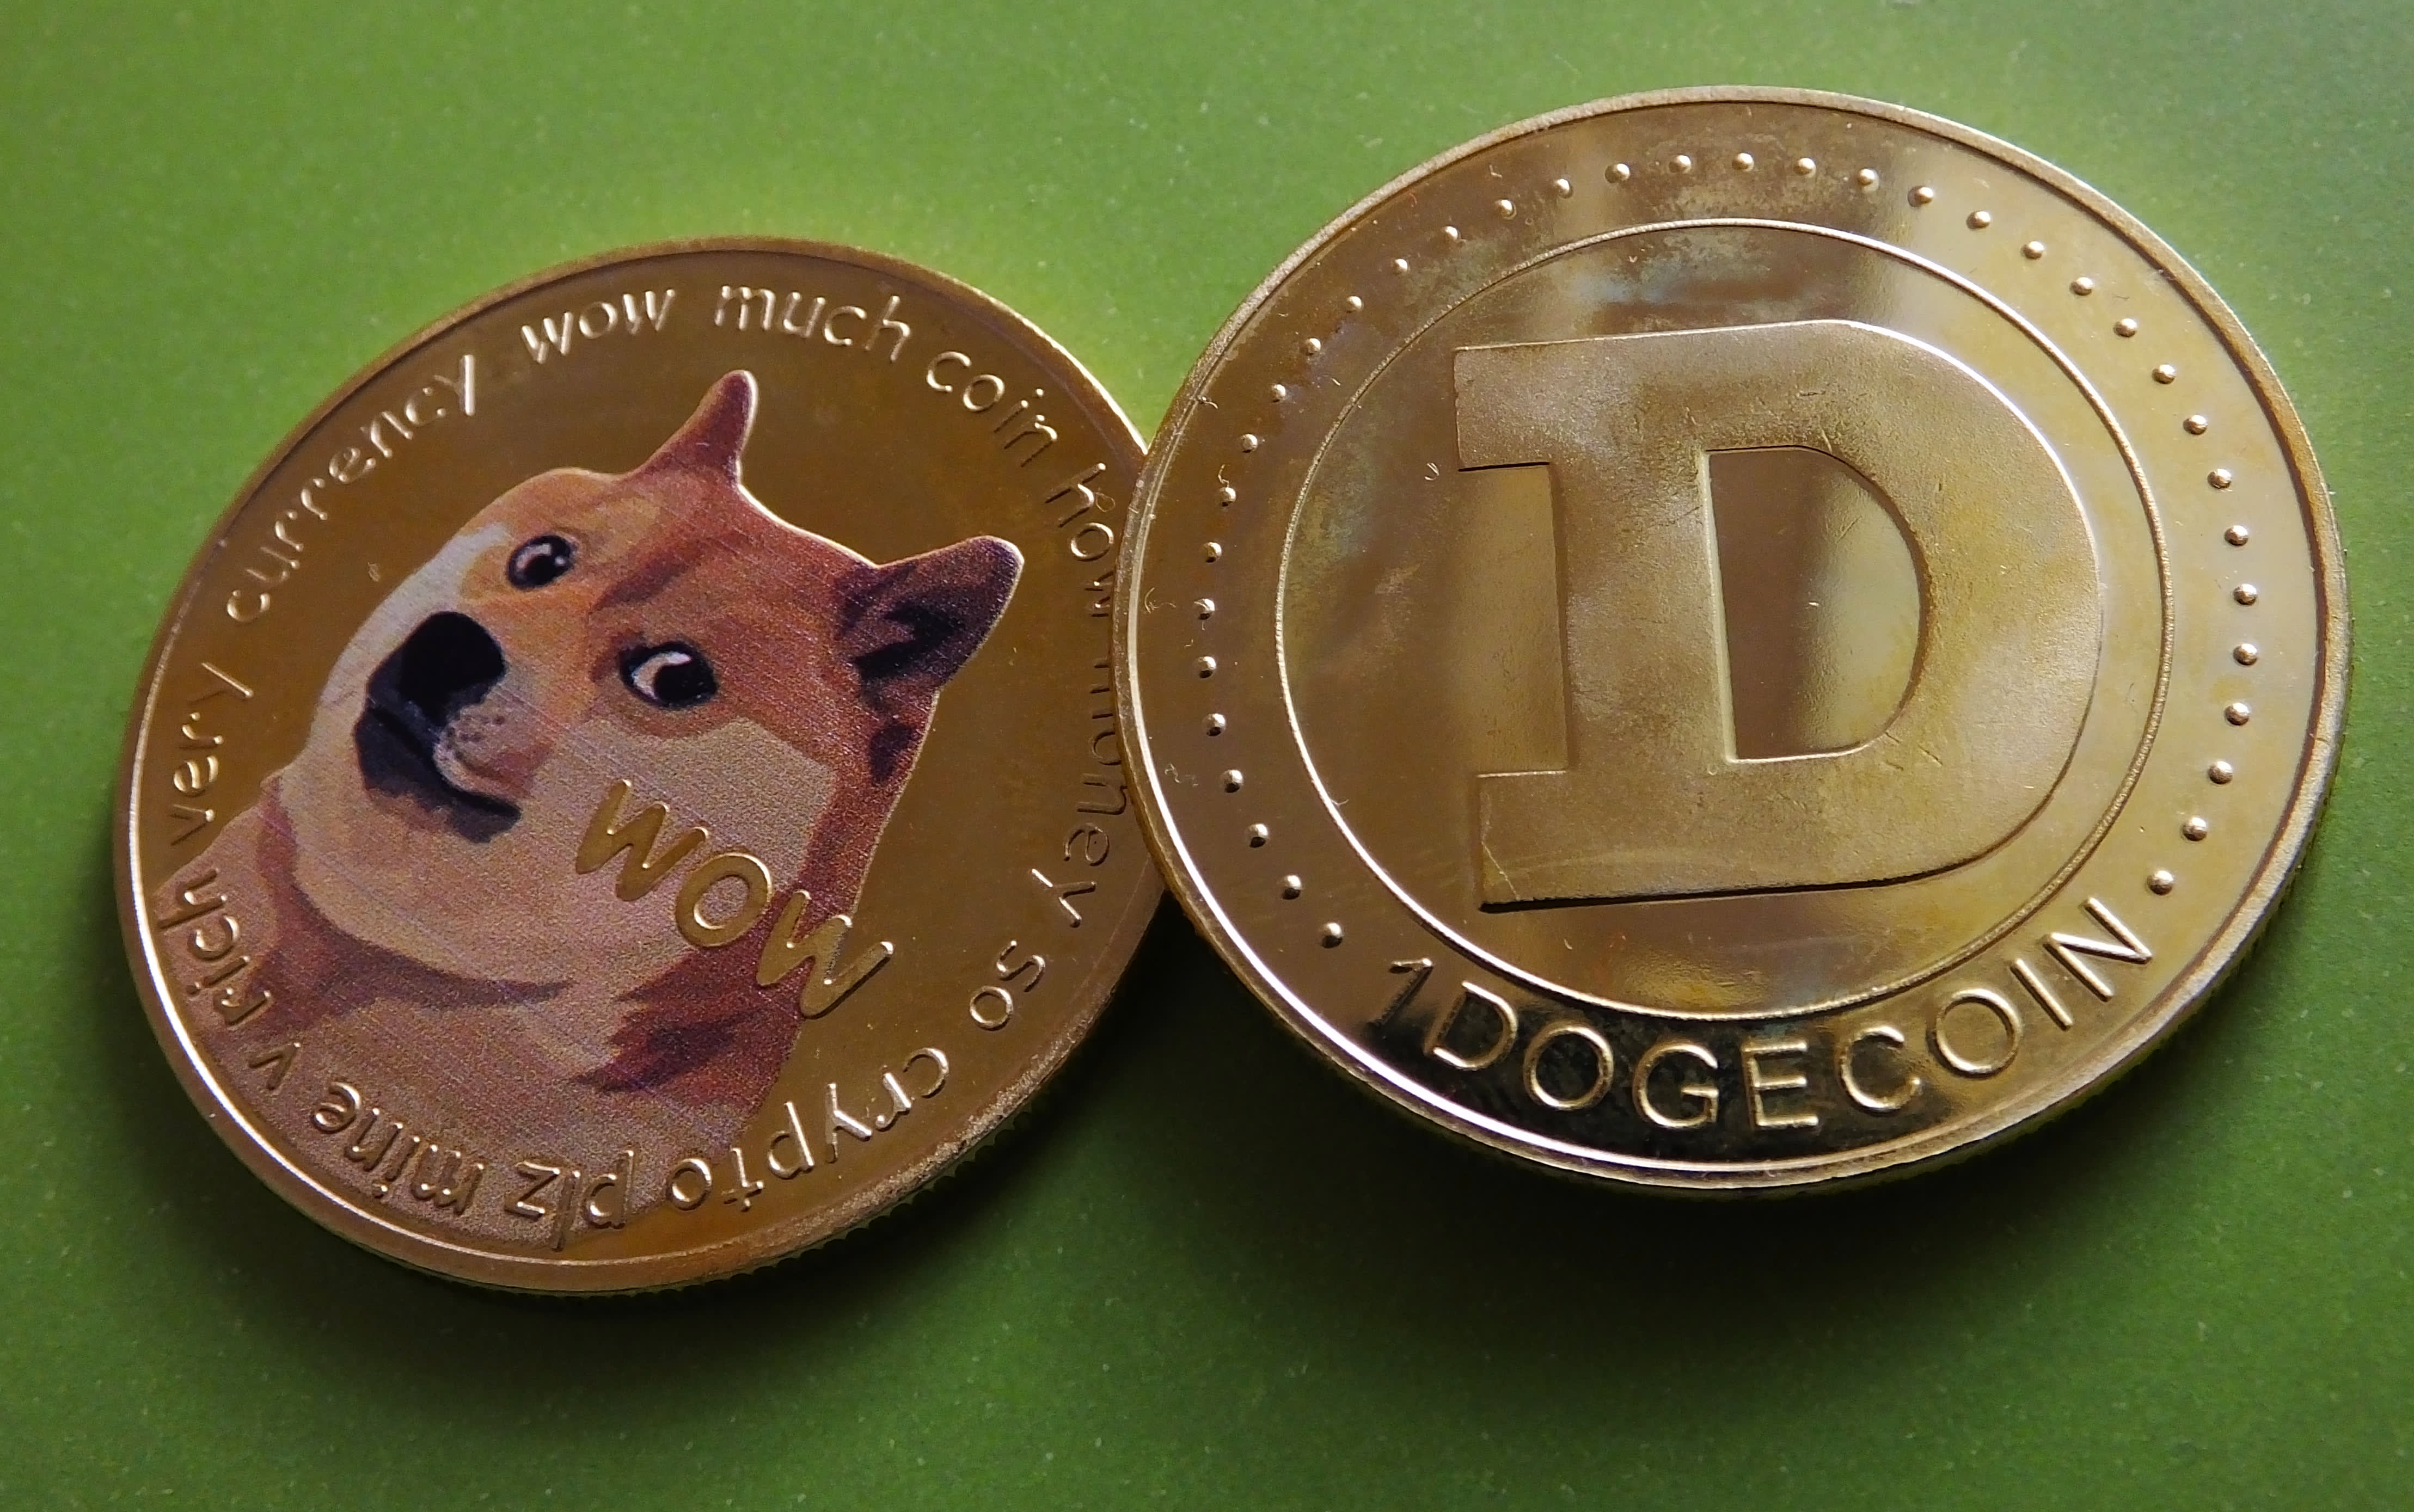 Should i sell my bitcoin for dogecoin